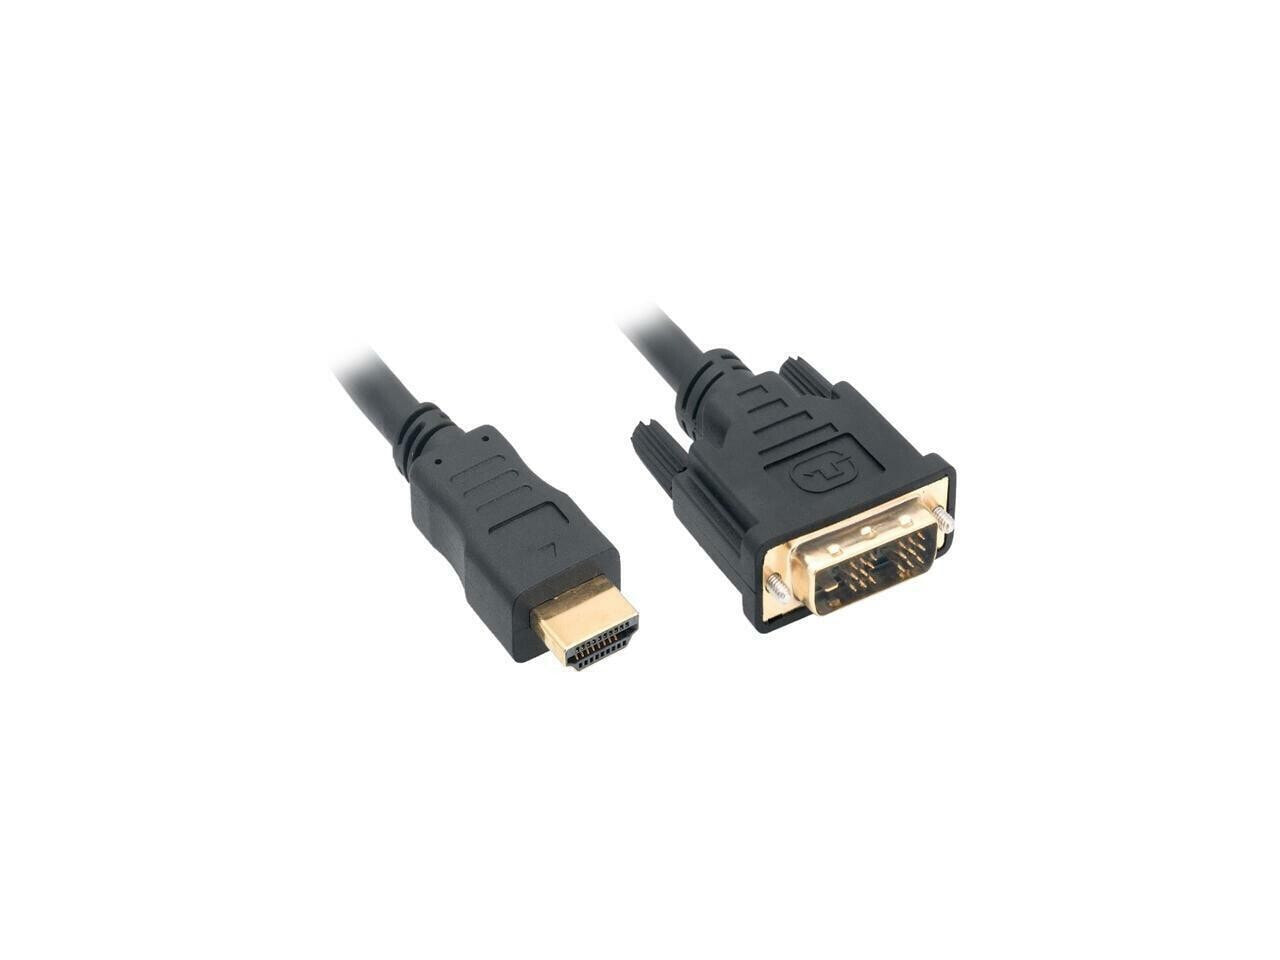 Nippon Labs DVI 5 HDMI 15 ft. HDMI Male to DVI-D Adapter Cable with Gold-plated